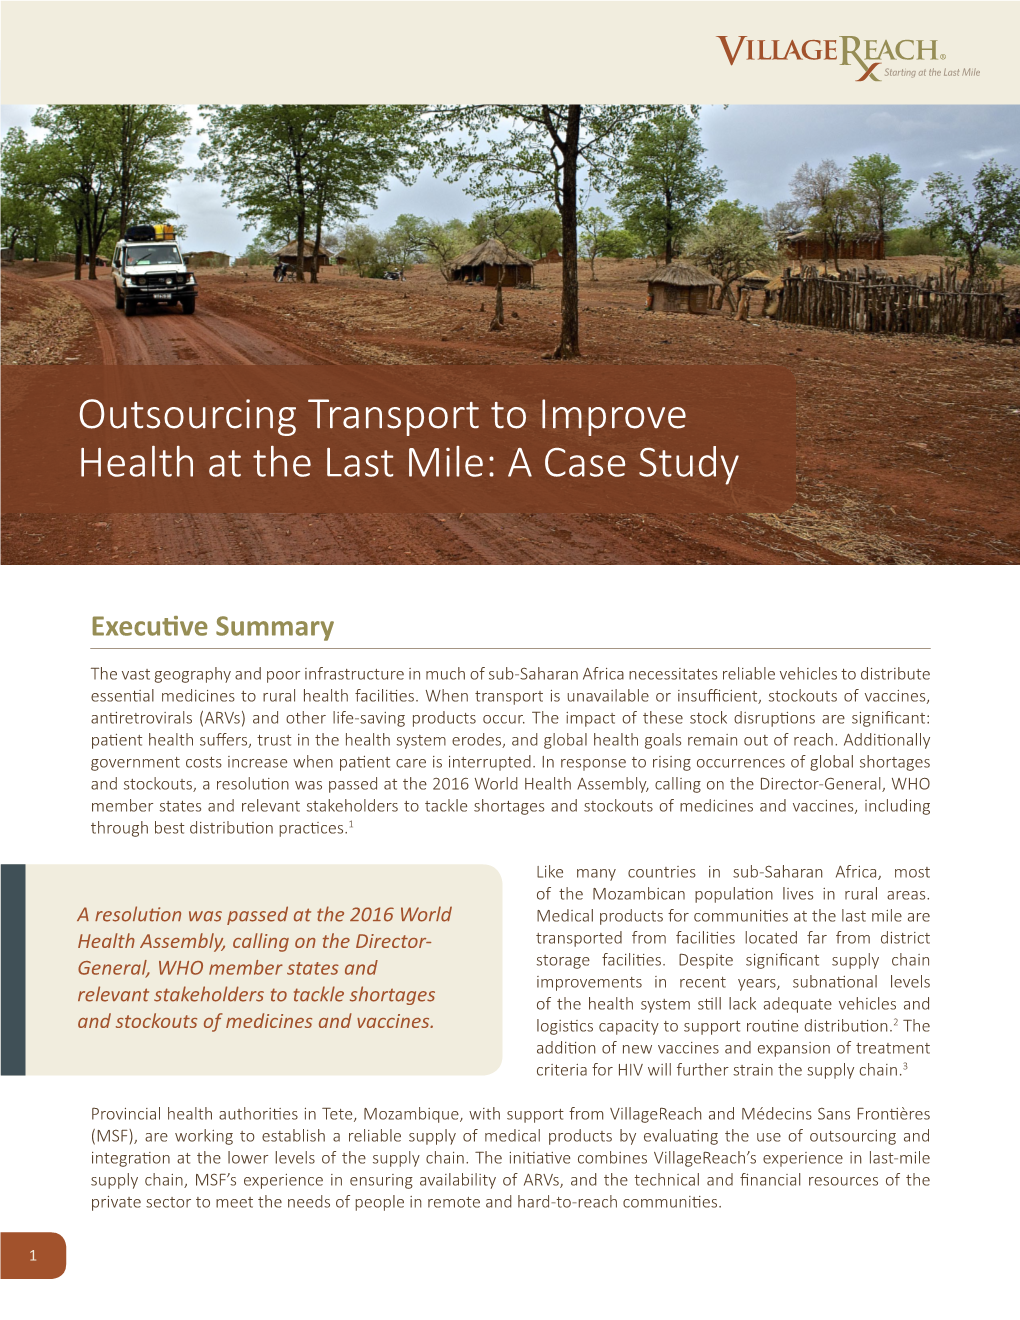 Outsourcing Transport to Improve Health at the Last Mile: a Case Study